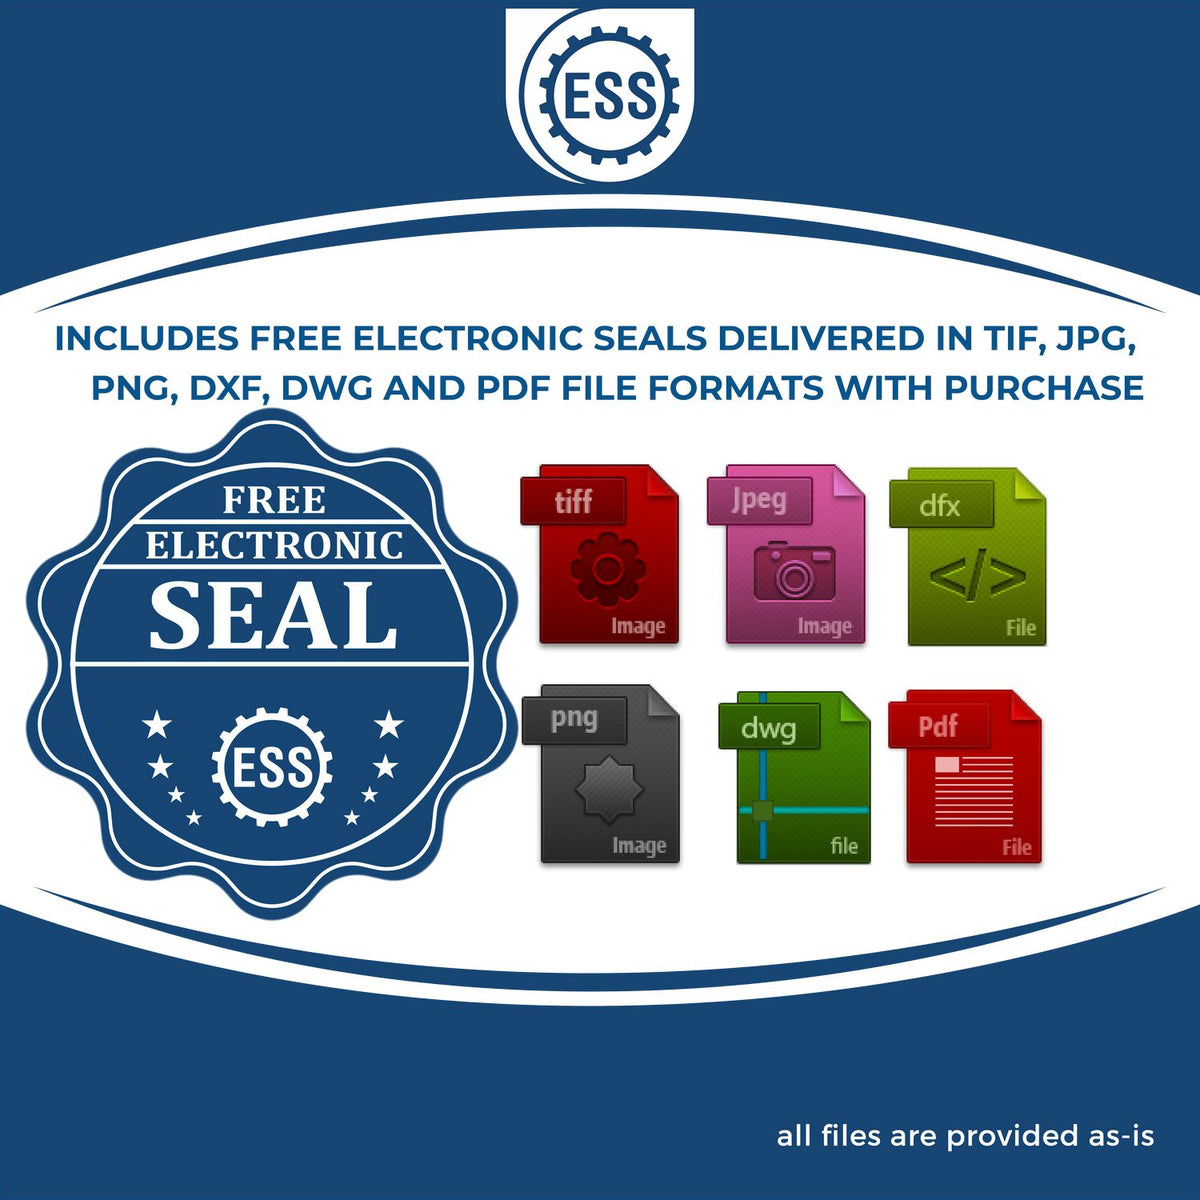 An infographic for the free electronic seal for the Heavy-Duty Illinois Rectangular Notary Stamp illustrating the different file type icons such as DXF, DWG, TIF, JPG and PNG.